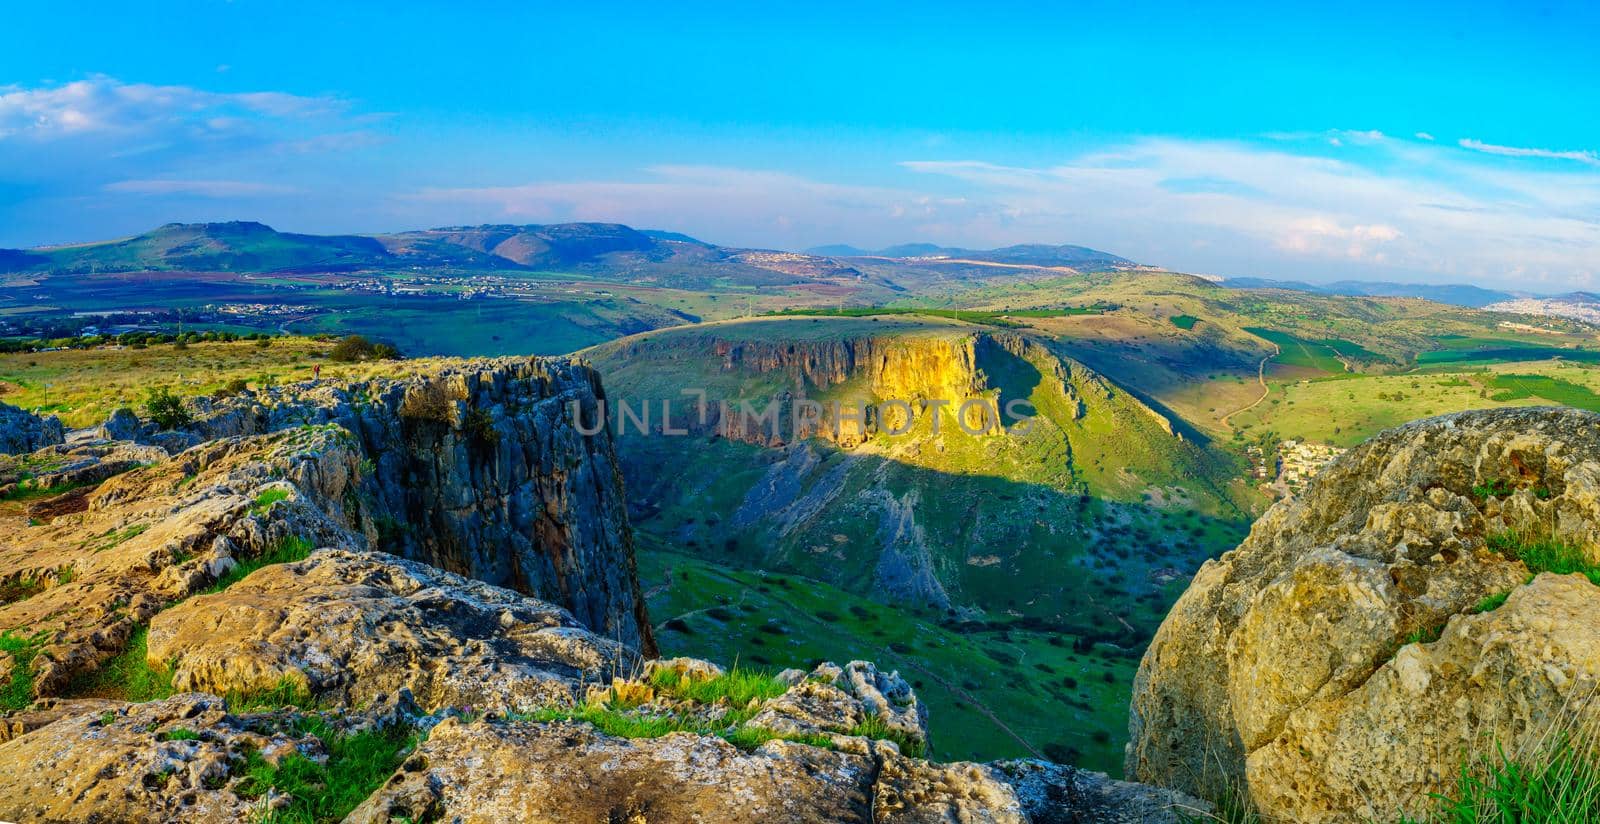 Panorama of Horns of Hattin and Mount Nitay from Arbel by RnDmS